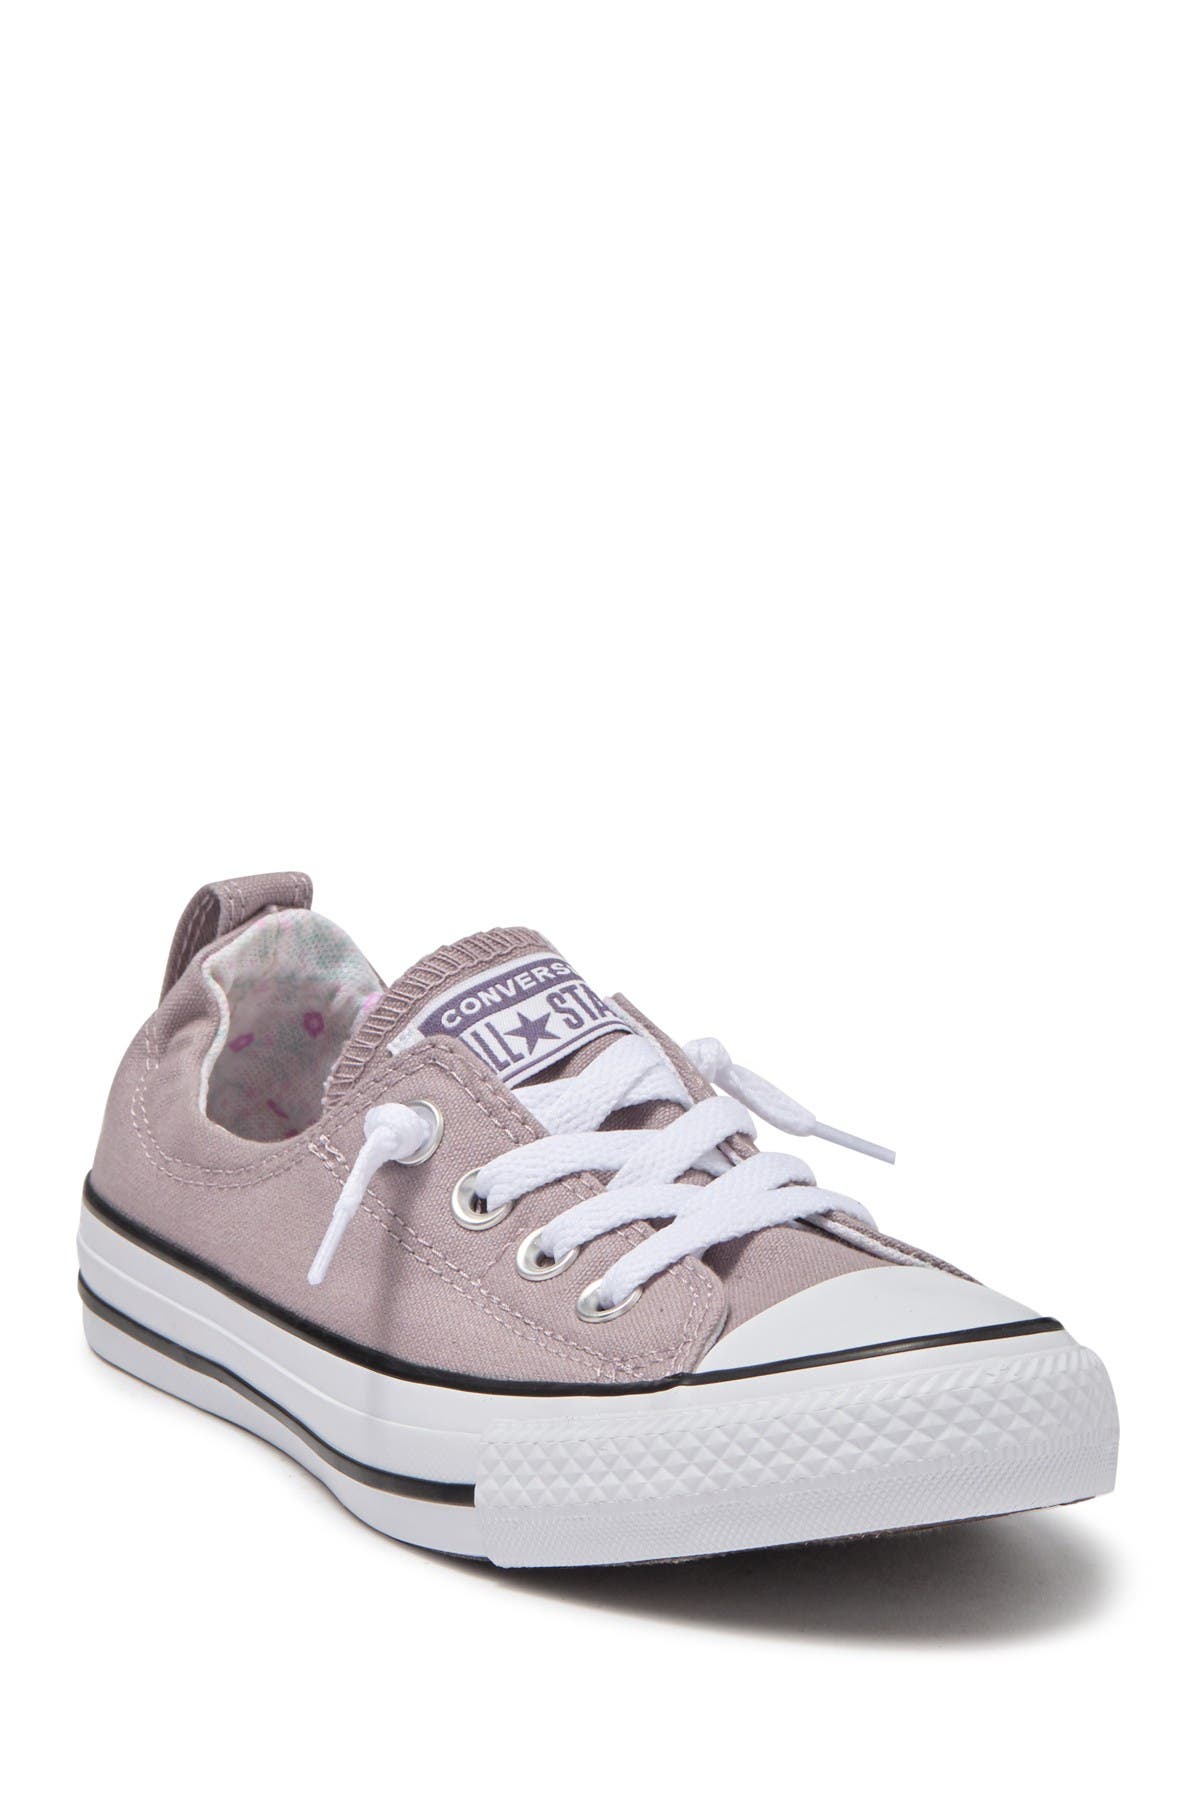 converse womens clothing